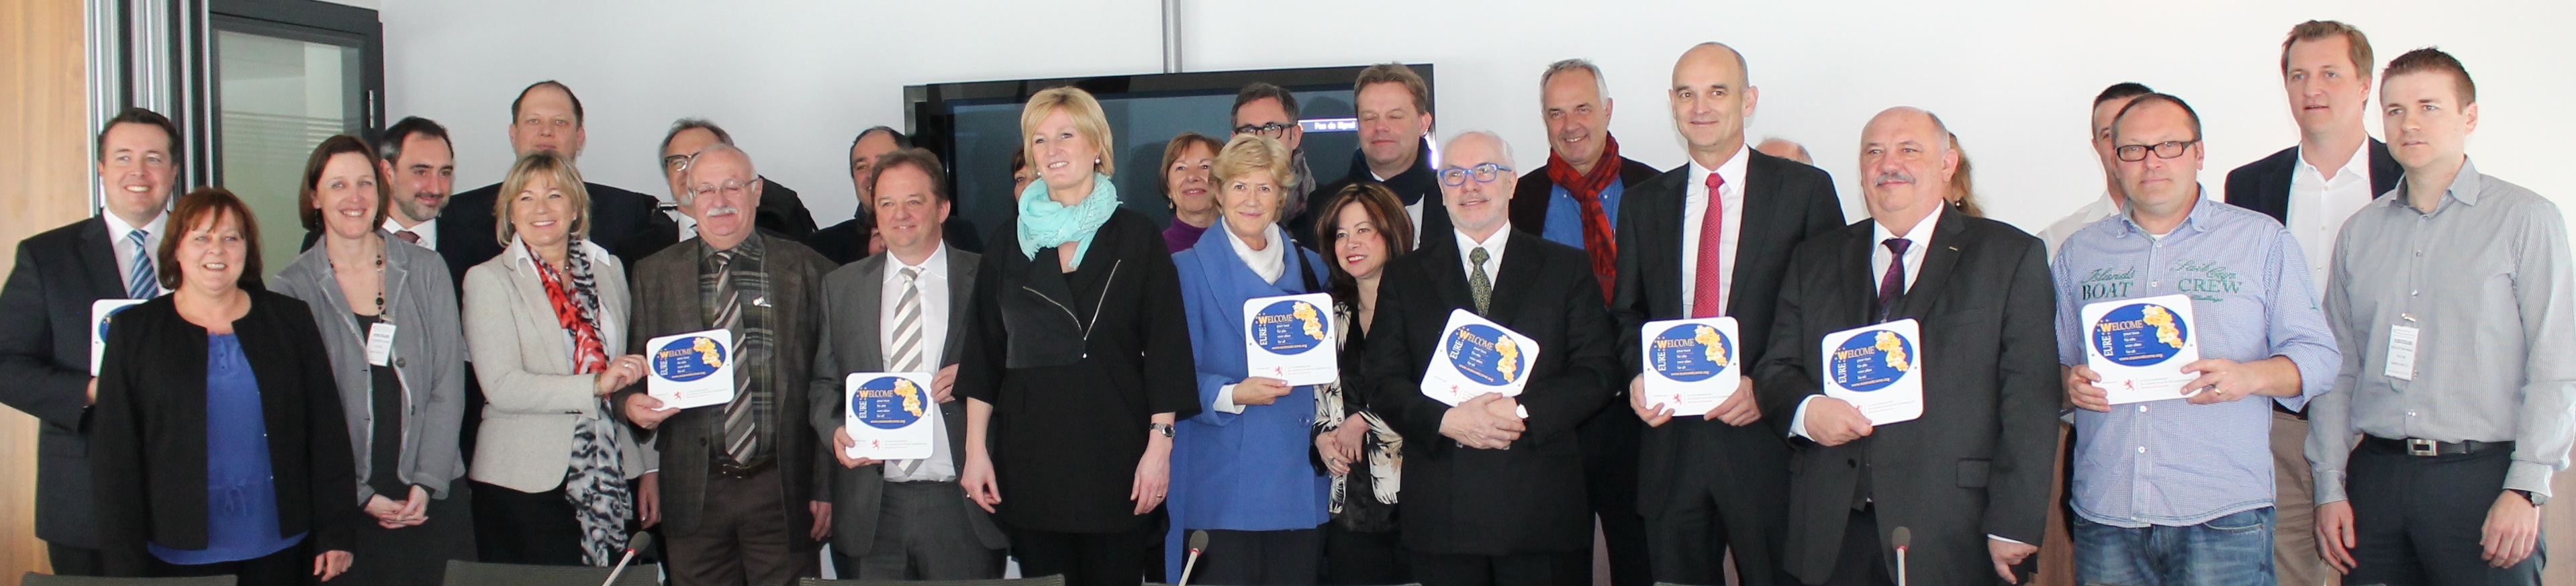 remise-eurewelcome-2014